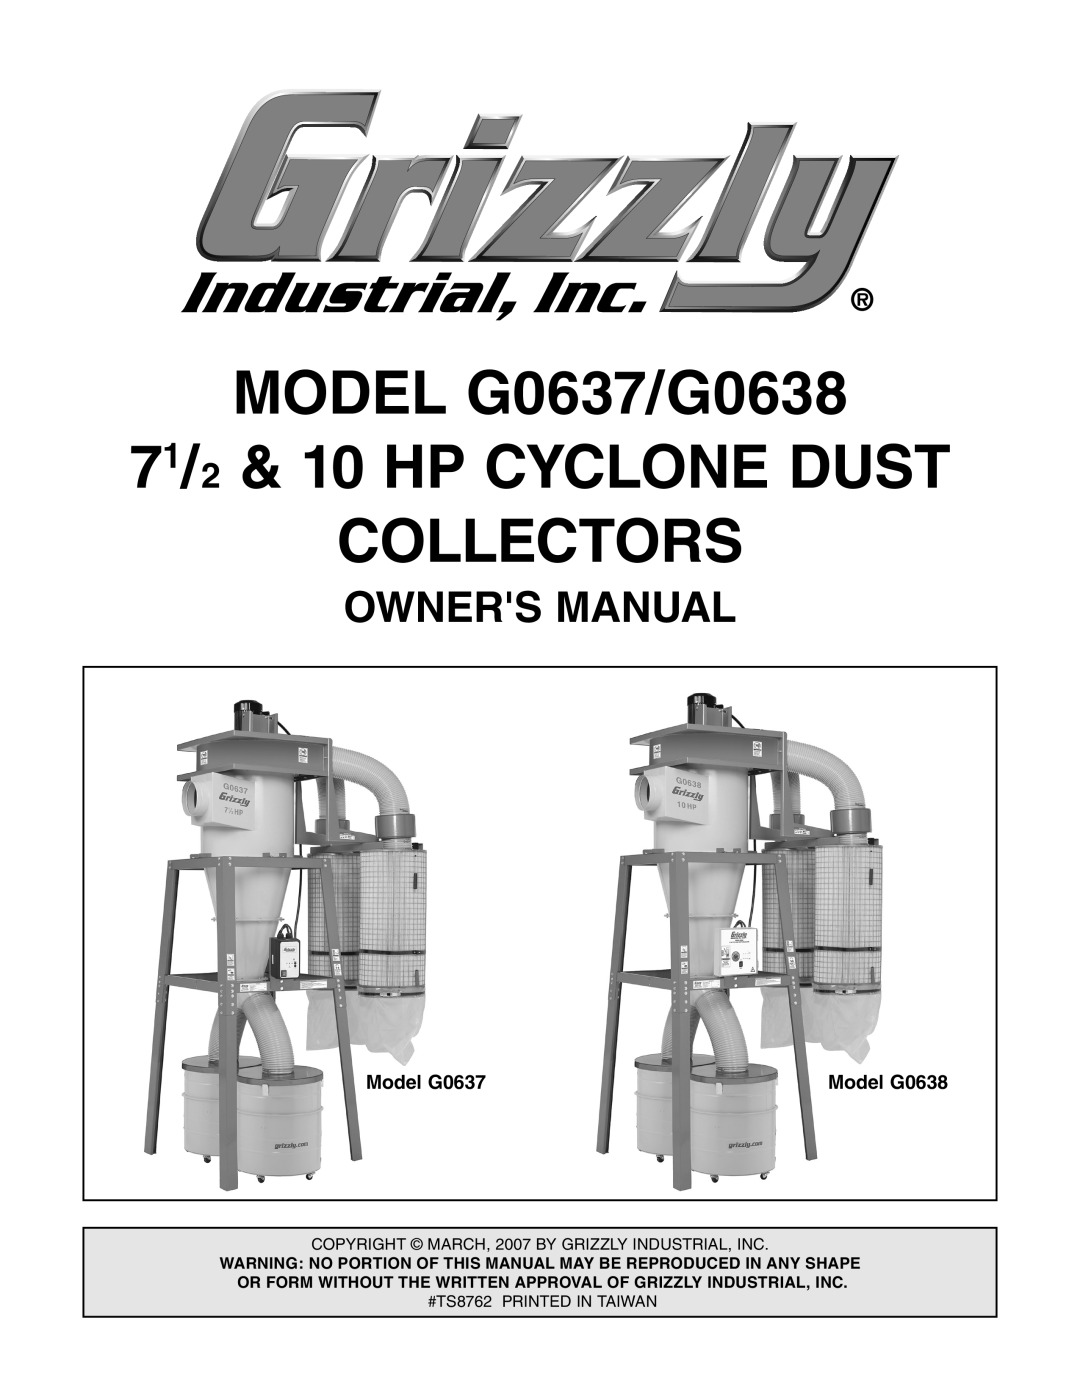 Grizzly owner manual Owners Manual, MODEL G0637/G0638 71/2 & 10 HP CYCLONE DUST, Collectors, Model G0638 